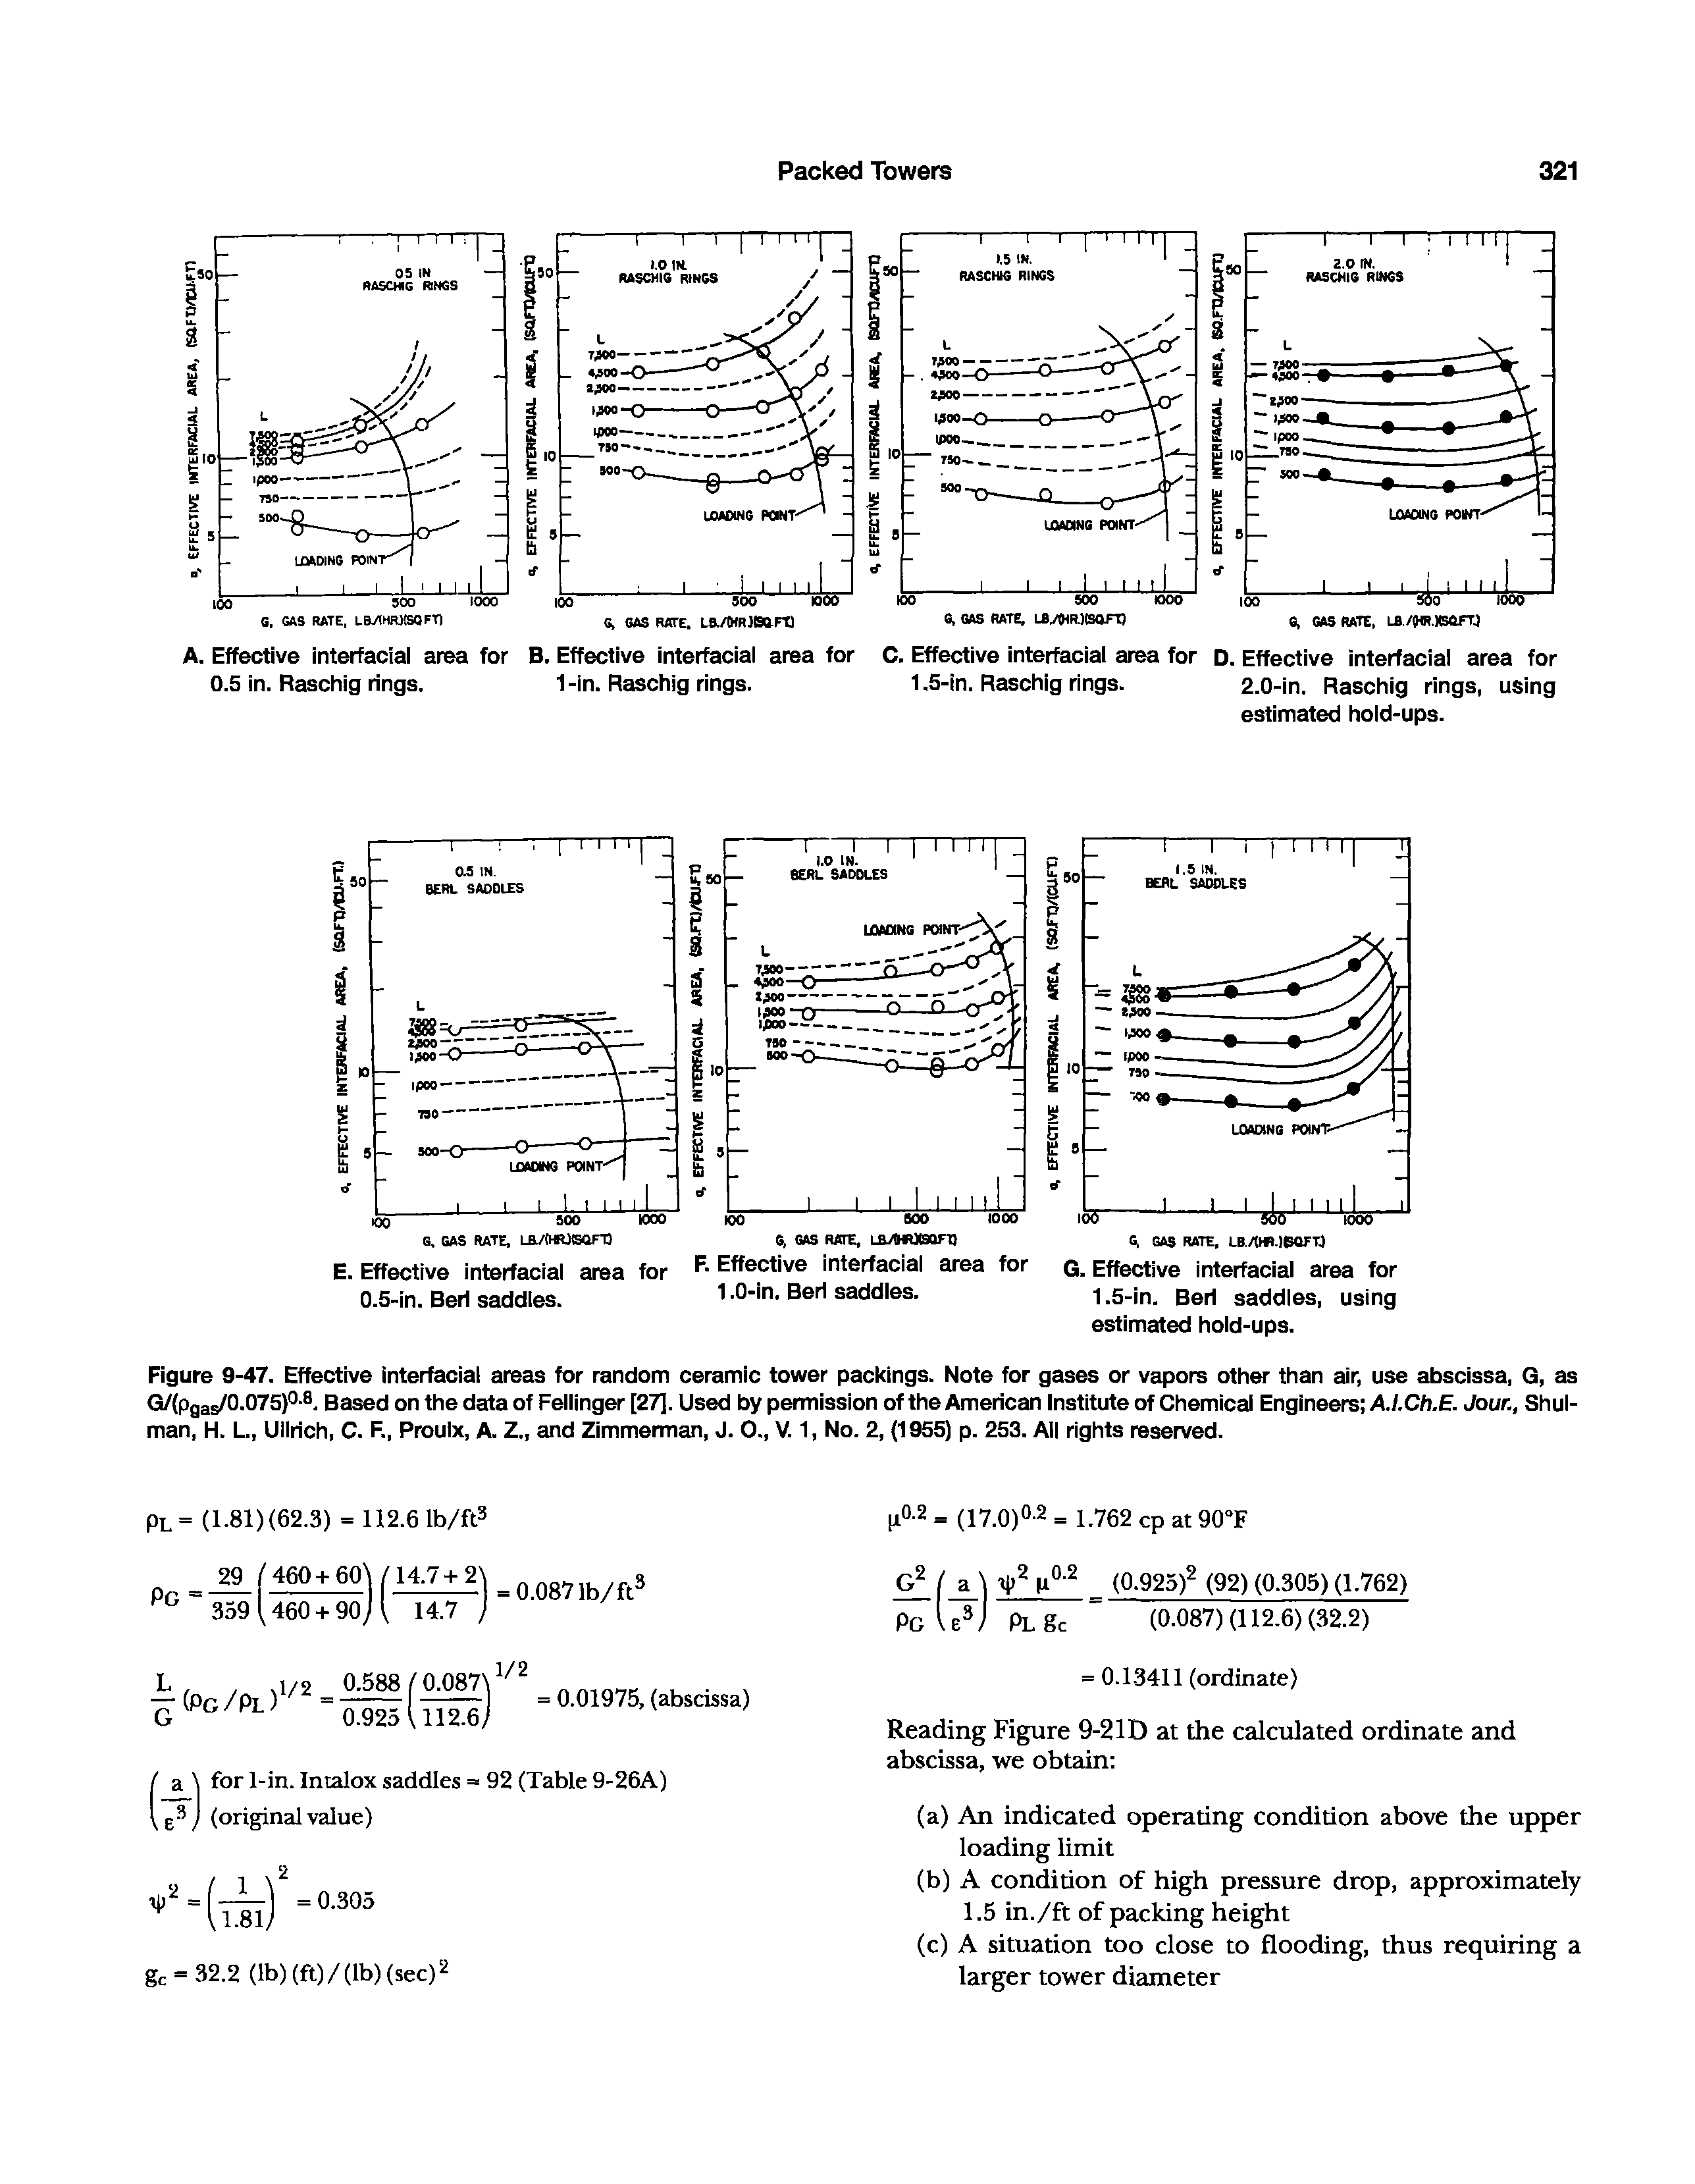 Figure 9-47. Effective interfacial areas for random ceramic tower packings. Note for gases or vapors other than air, use abscissa, G, as G/(pgas/0.075) -°. Based on the detta of Fellinger [27]. Used by permission of the Amedcan Institute of Chemical Engineers A.I.Ch.E. Jour., Shul-man, H. L, Ulldch, C. F., Proulx, A. Z., and Zimmerman, J. O., V 1, No. 2, (1955) p. 253. All rights reserved.